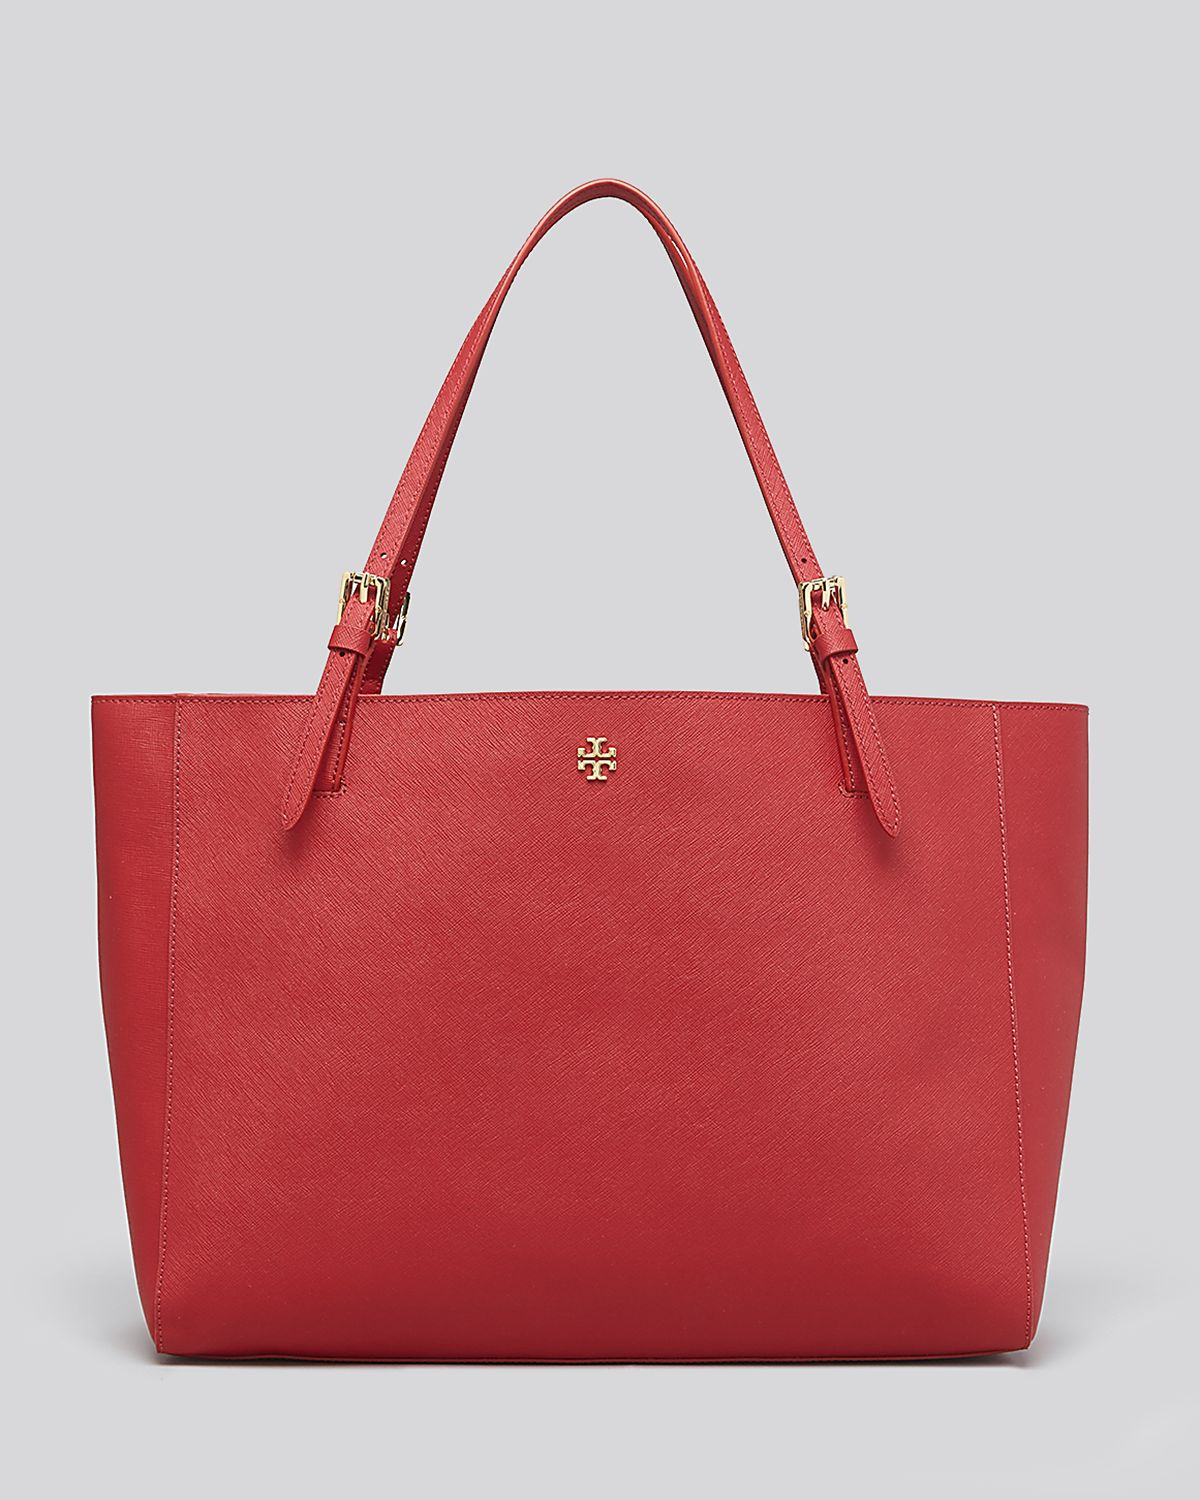 Tory burch York Buckle Tote in Red (Kir Royale Red) | Lyst